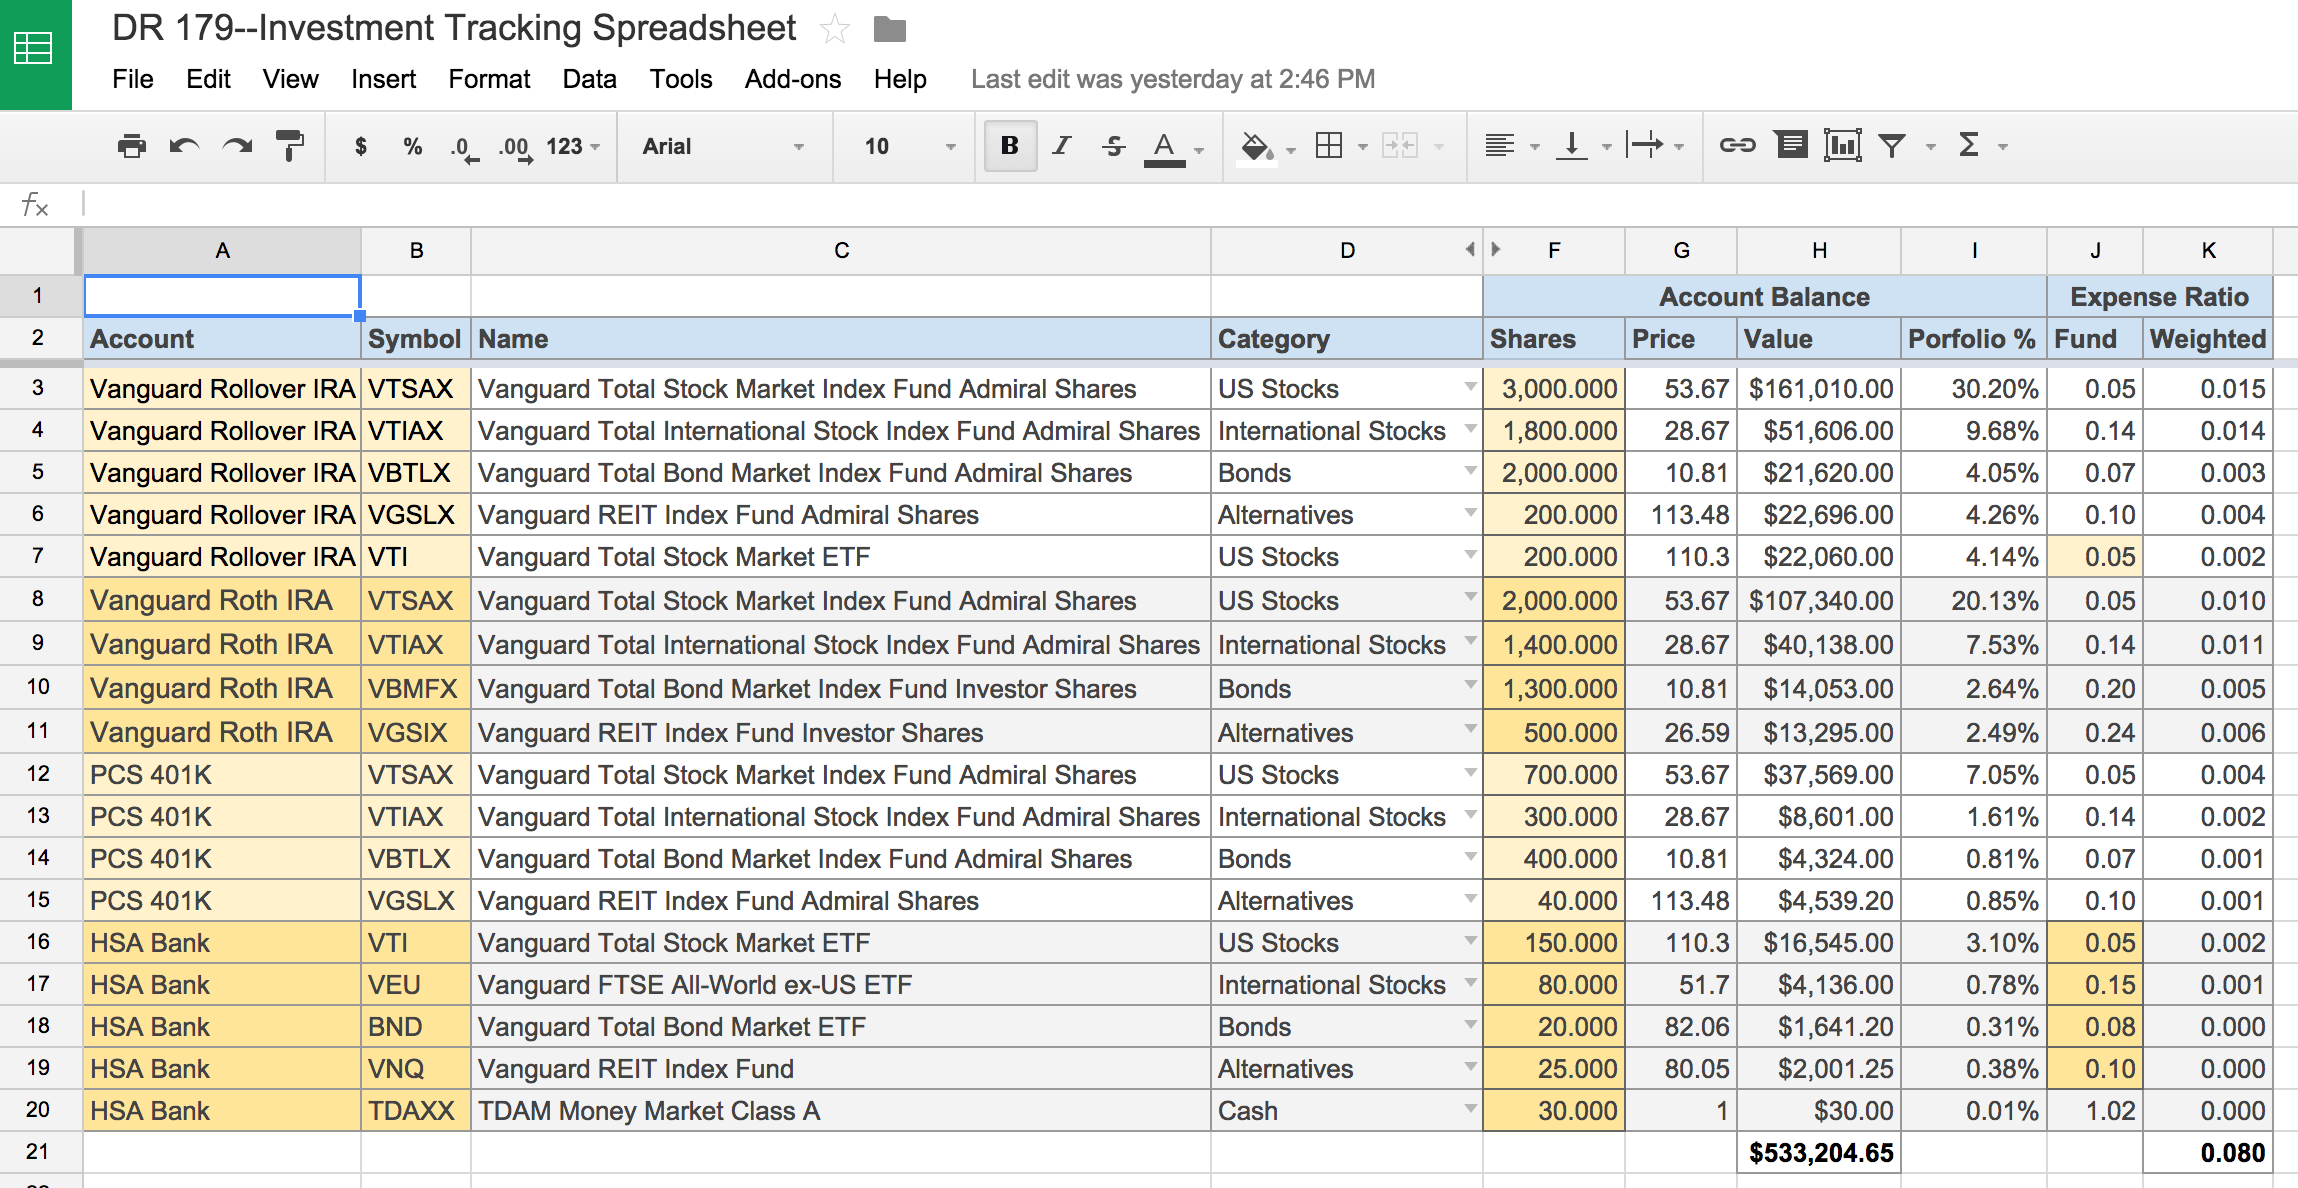 Credit Card Rewards Spreadsheet Within An Awesome And Free Investment Tracking Spreadsheet